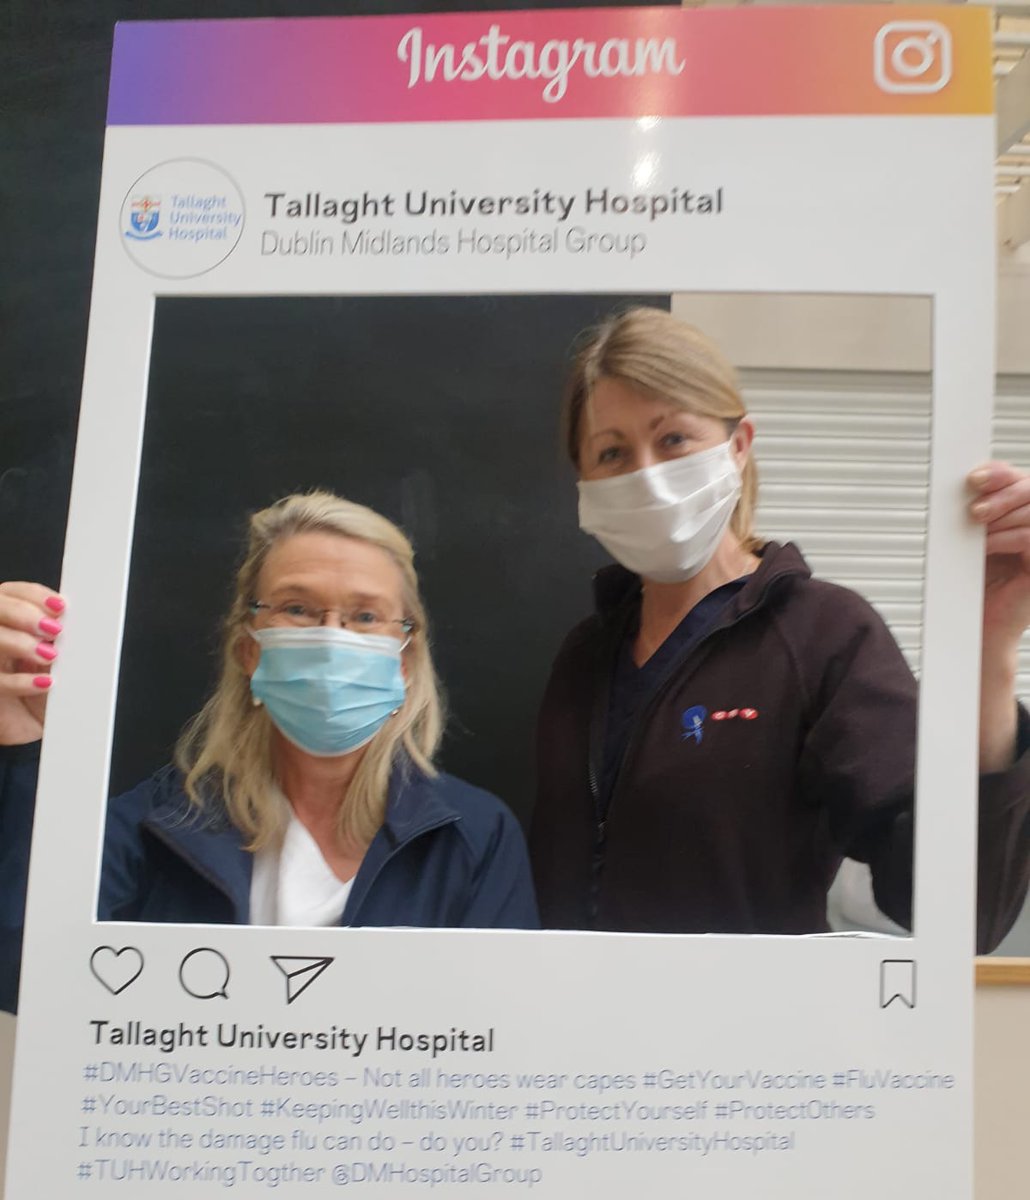 .@lucybane & Helen Connaughton delighted to get the #FluVaccine @DMHospitalGroup at #TallaghtUniversityHospital today. 

Thank You to everyoneinvolved!
#ProtectOthers #ProtectYourself #YourBestShot